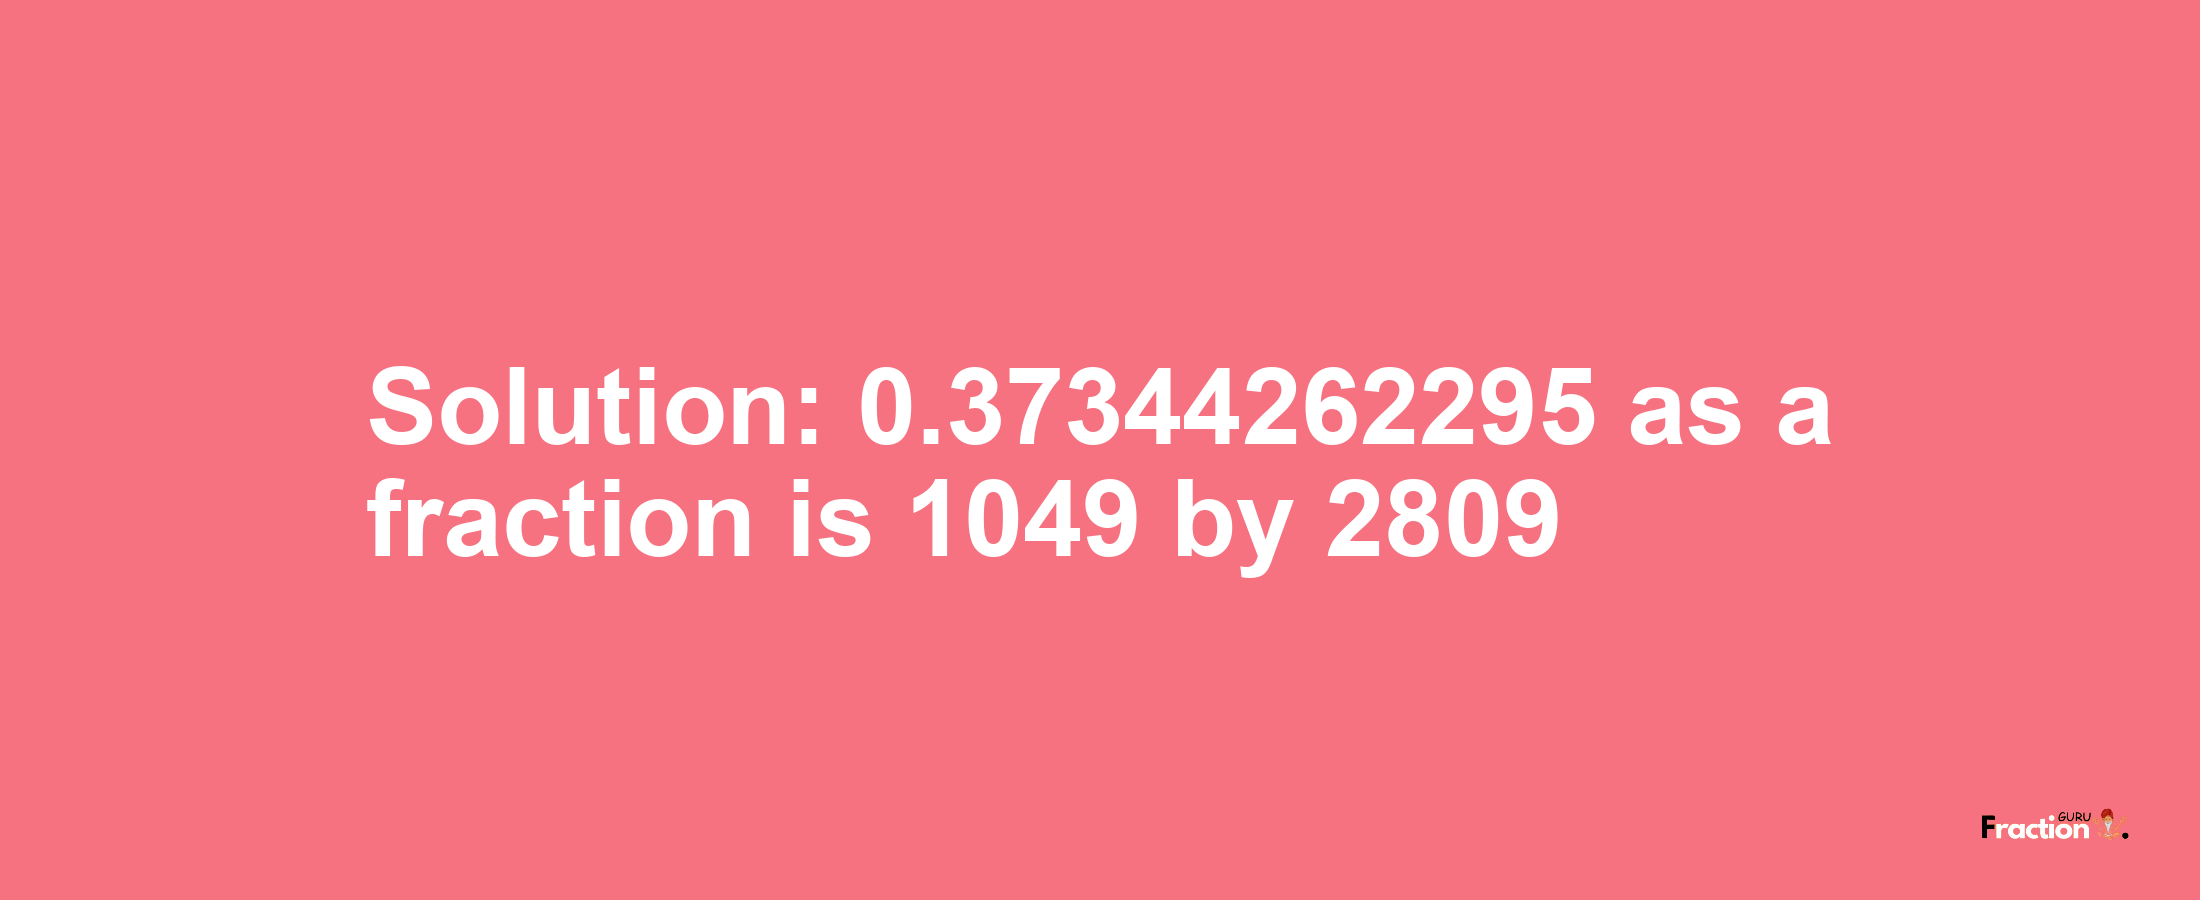 Solution:0.37344262295 as a fraction is 1049/2809